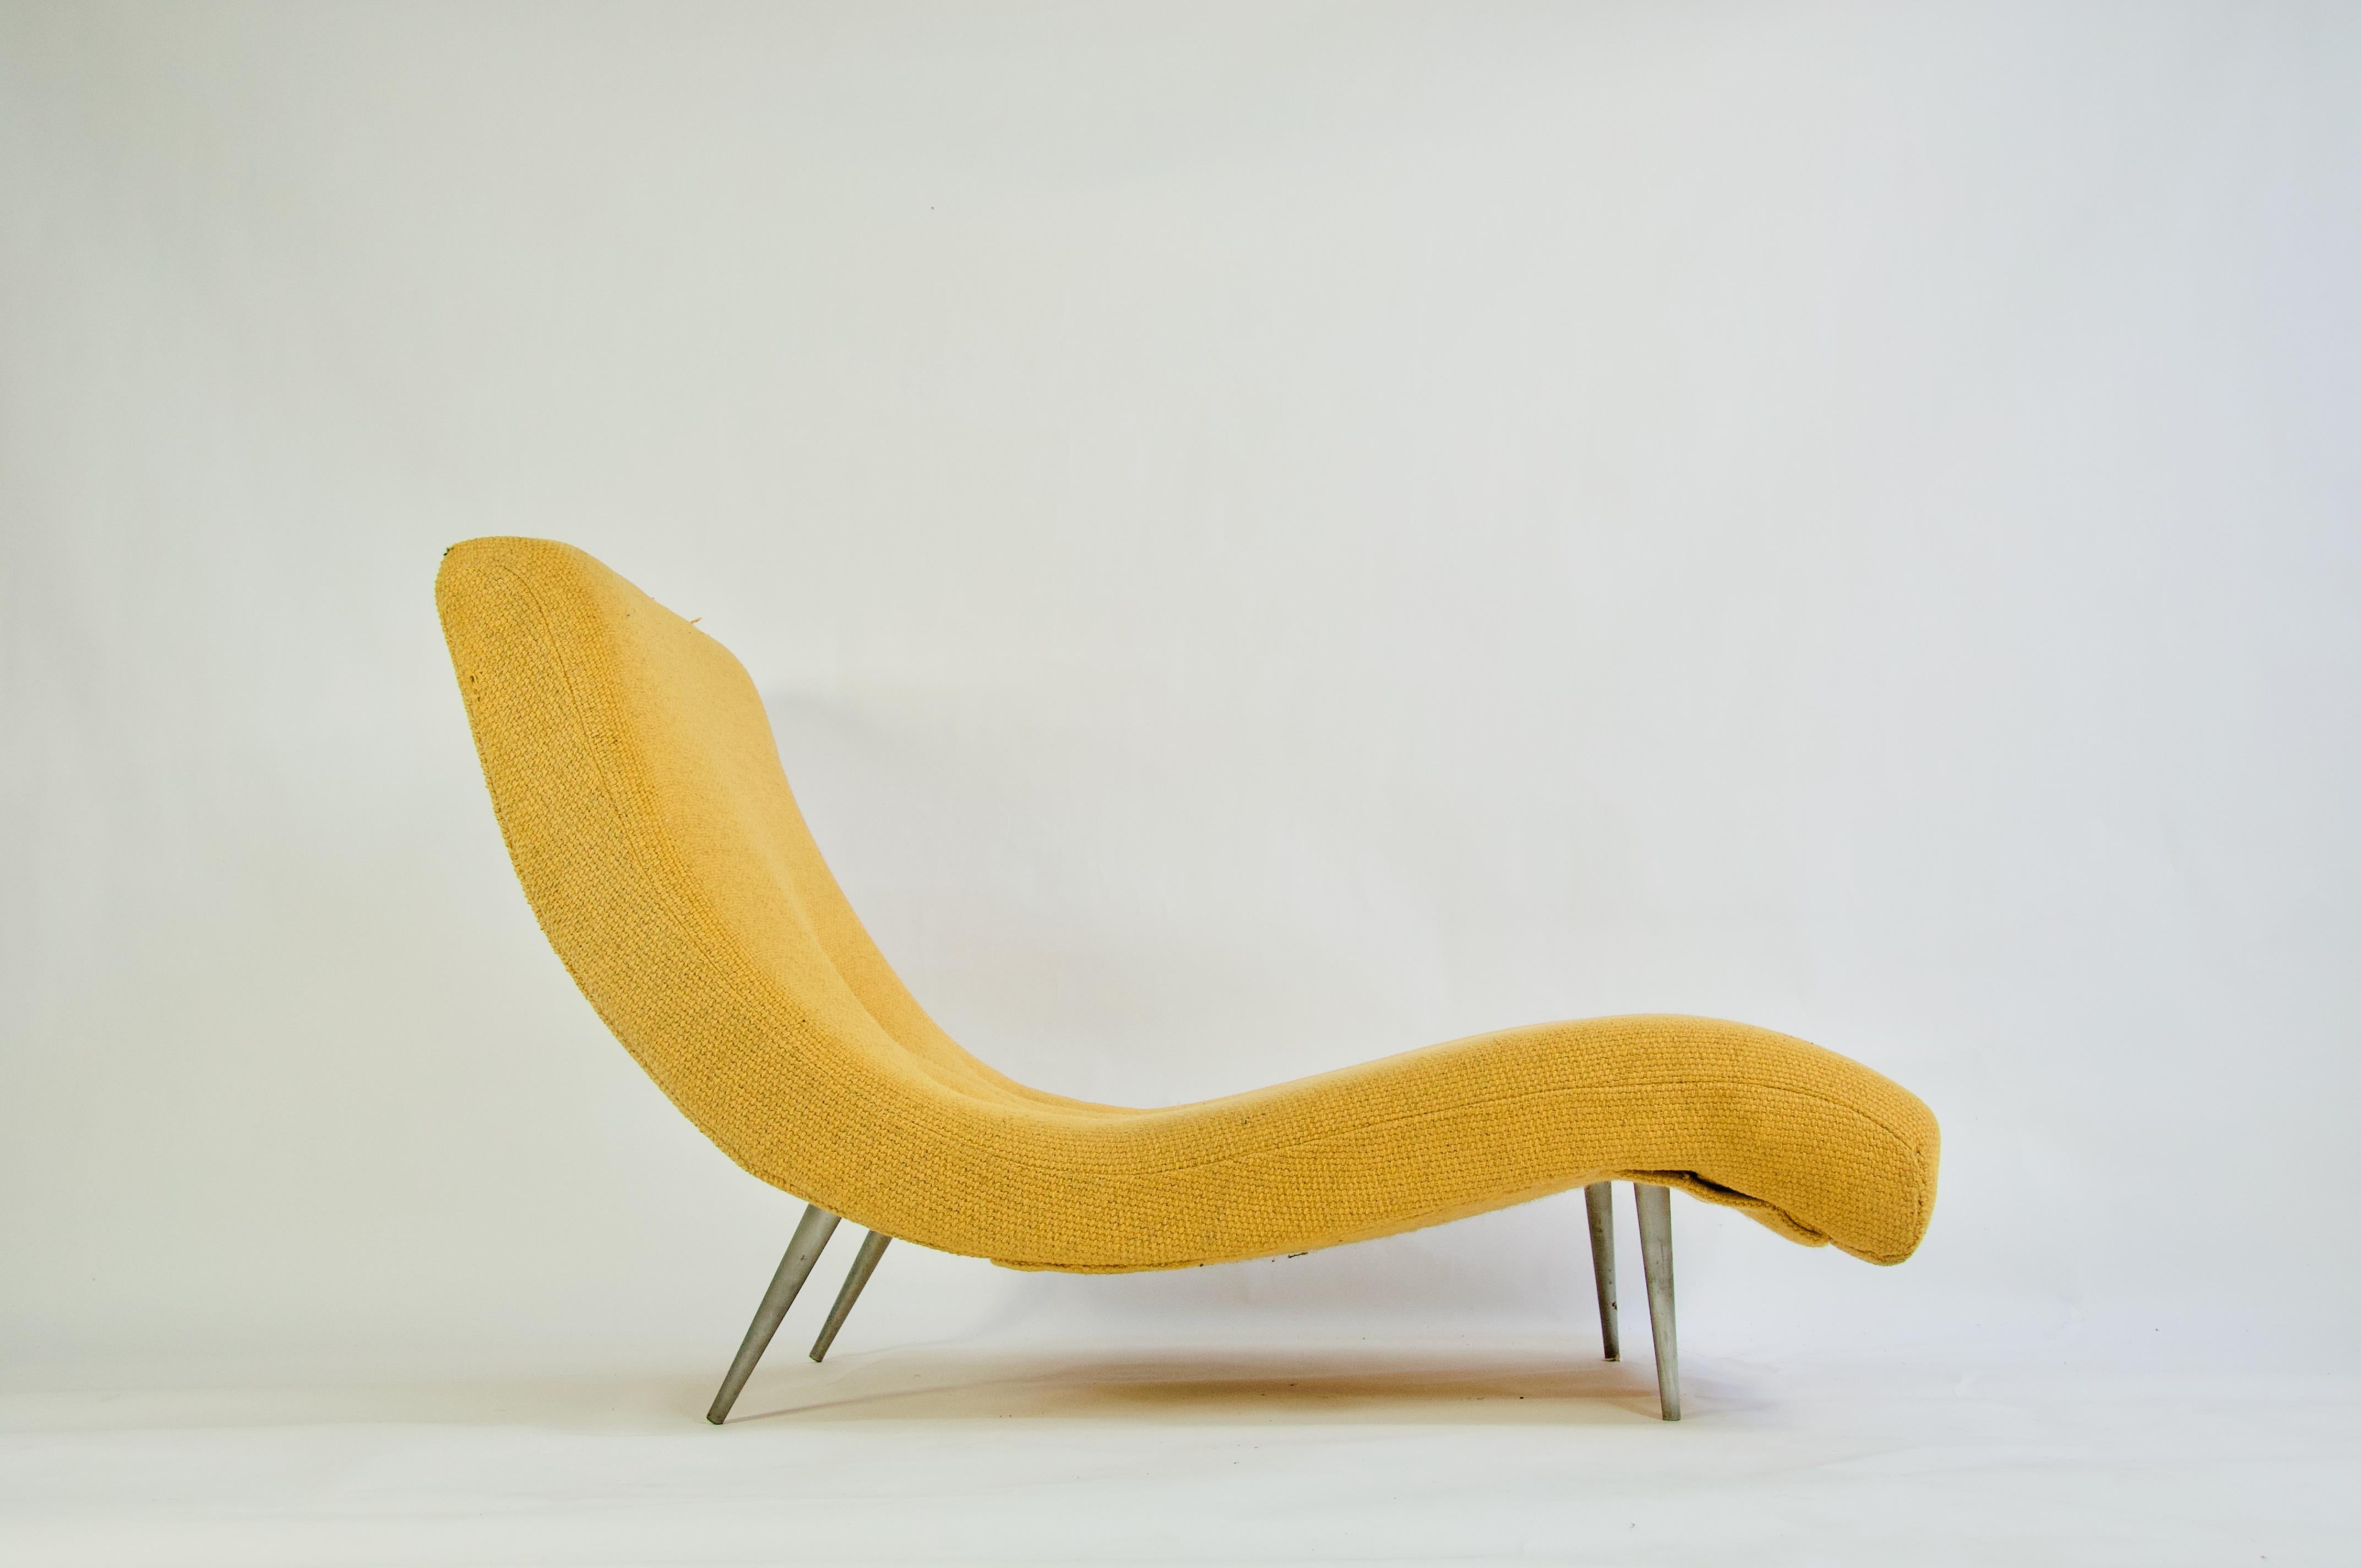 Adrian Pearsall for craft associates chaise lounge with metal legs, 1960s.